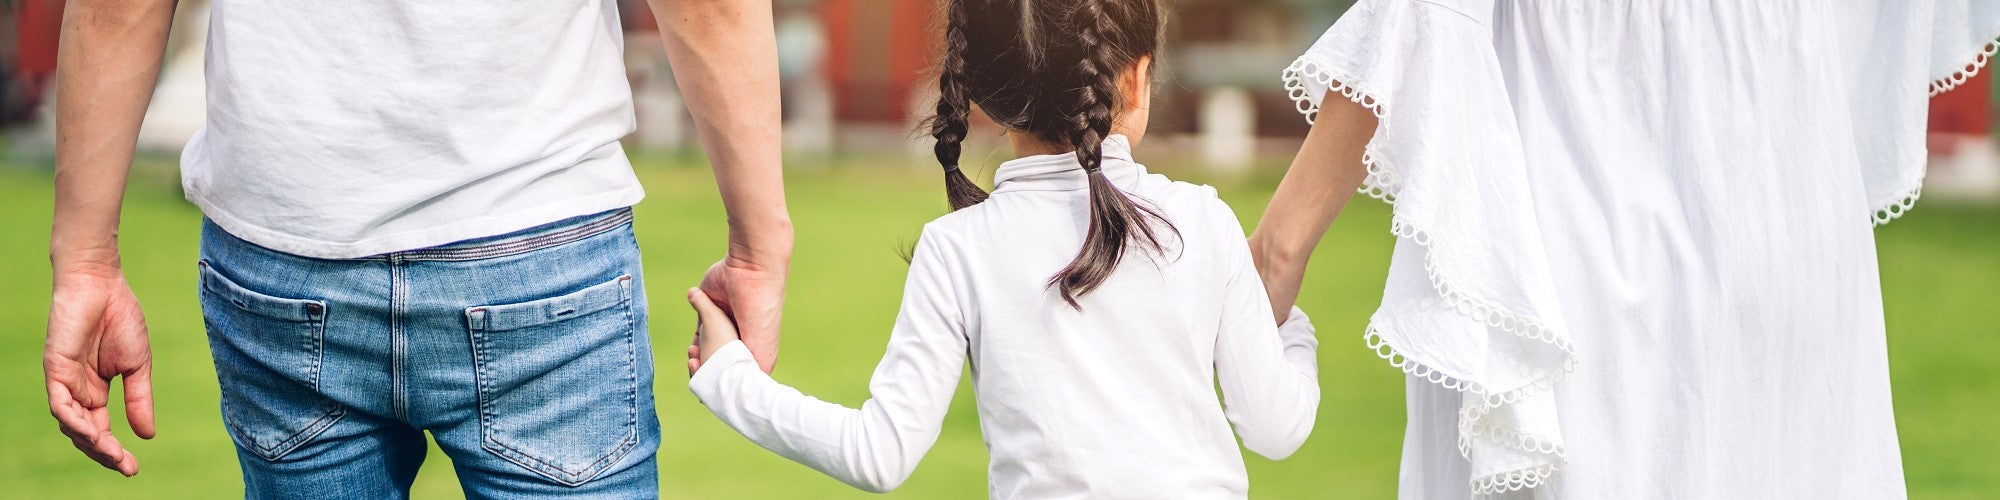 Mindful Parenting: Nurturing Connections in a Fast-Paced World